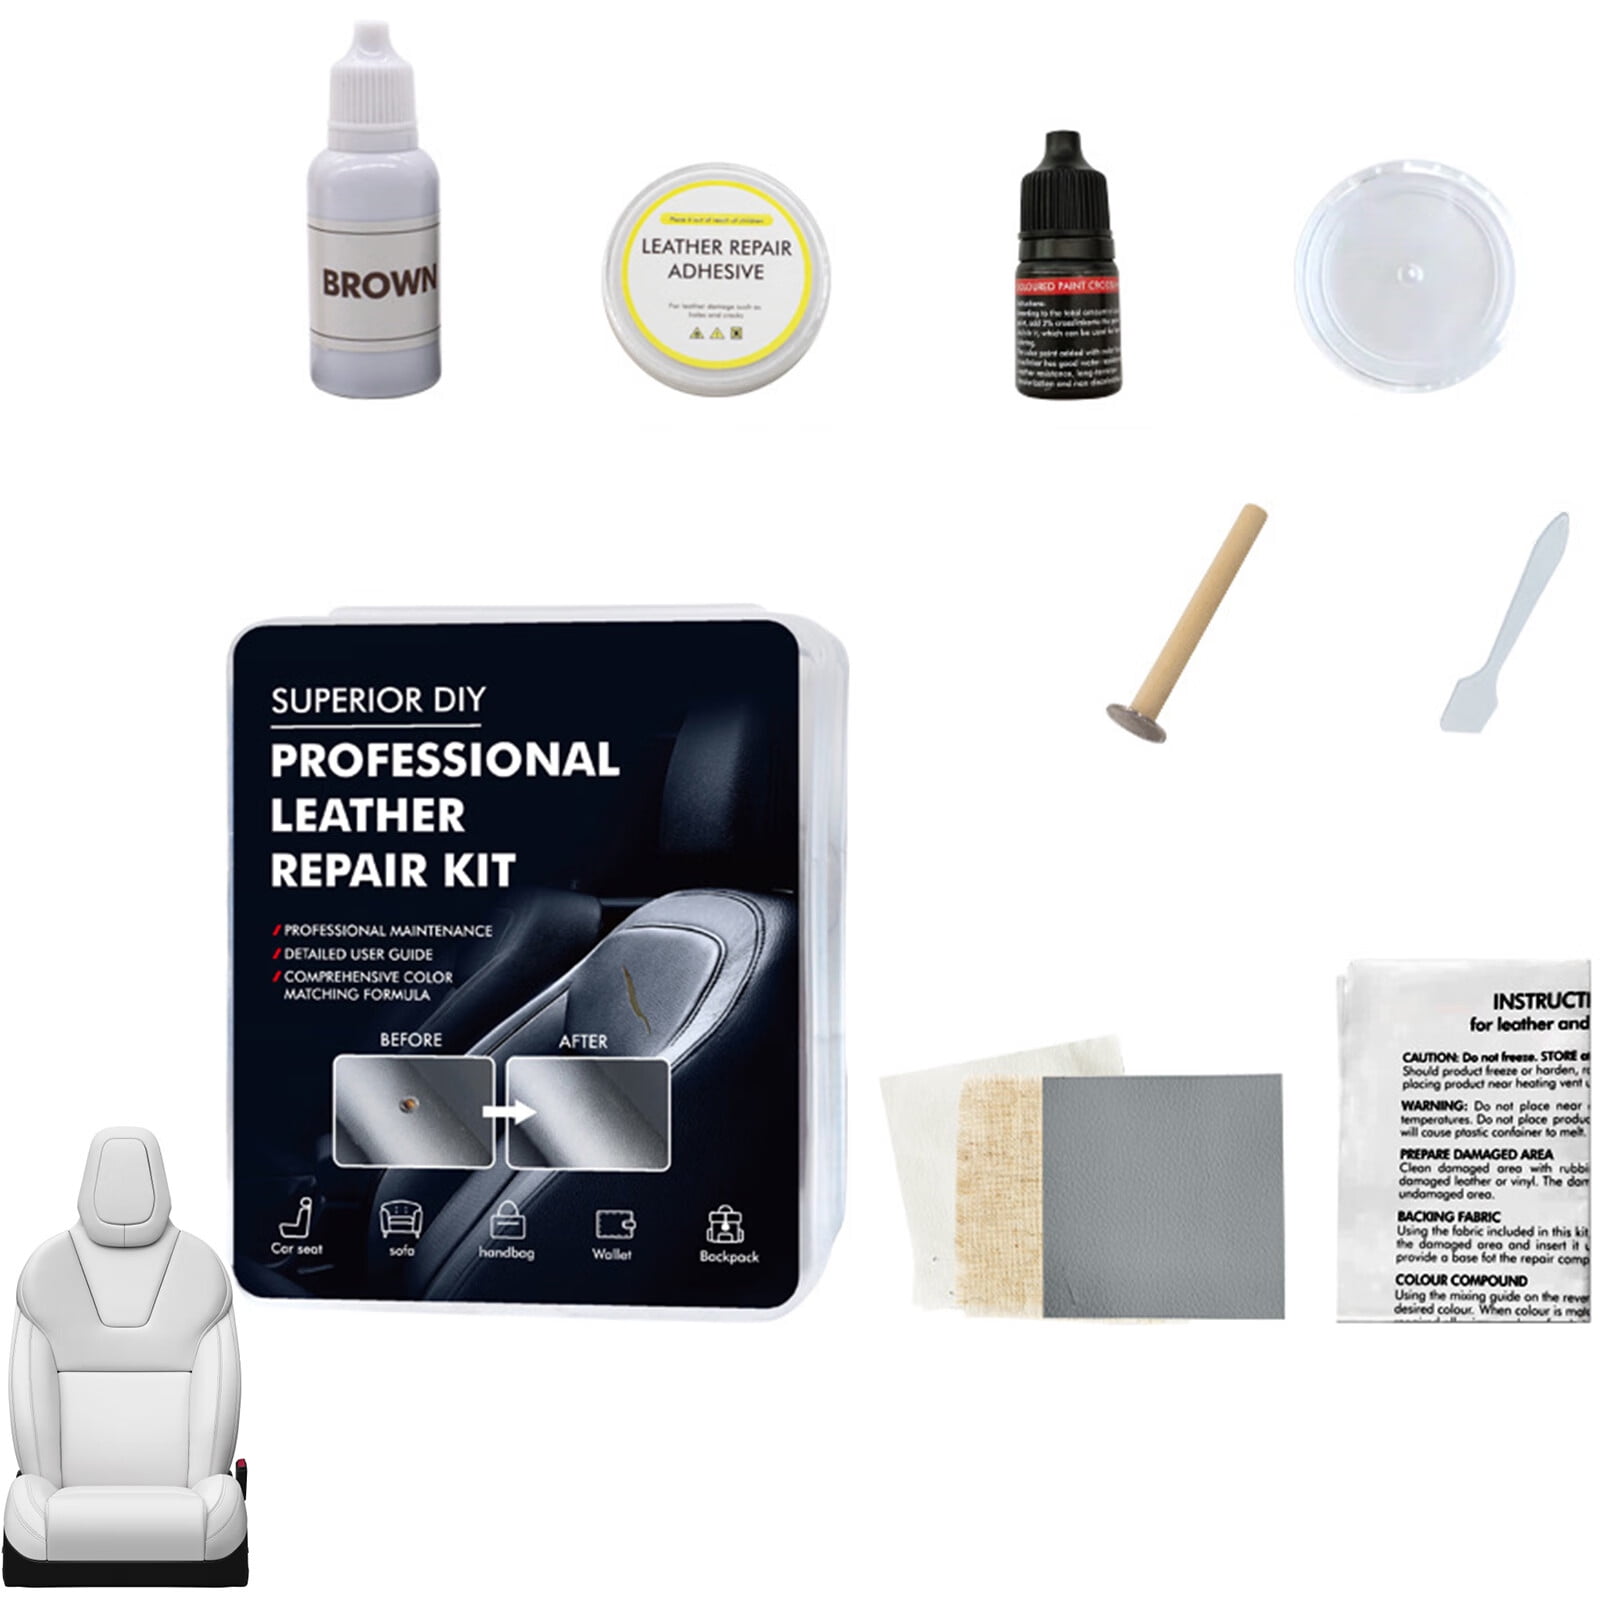 Visbella DIY for Small Leather Repair and Vinyl Repair Kit - Patch Leather and Vinyl with Ease for Car Seats, Shoes, Couches, Repair and More.